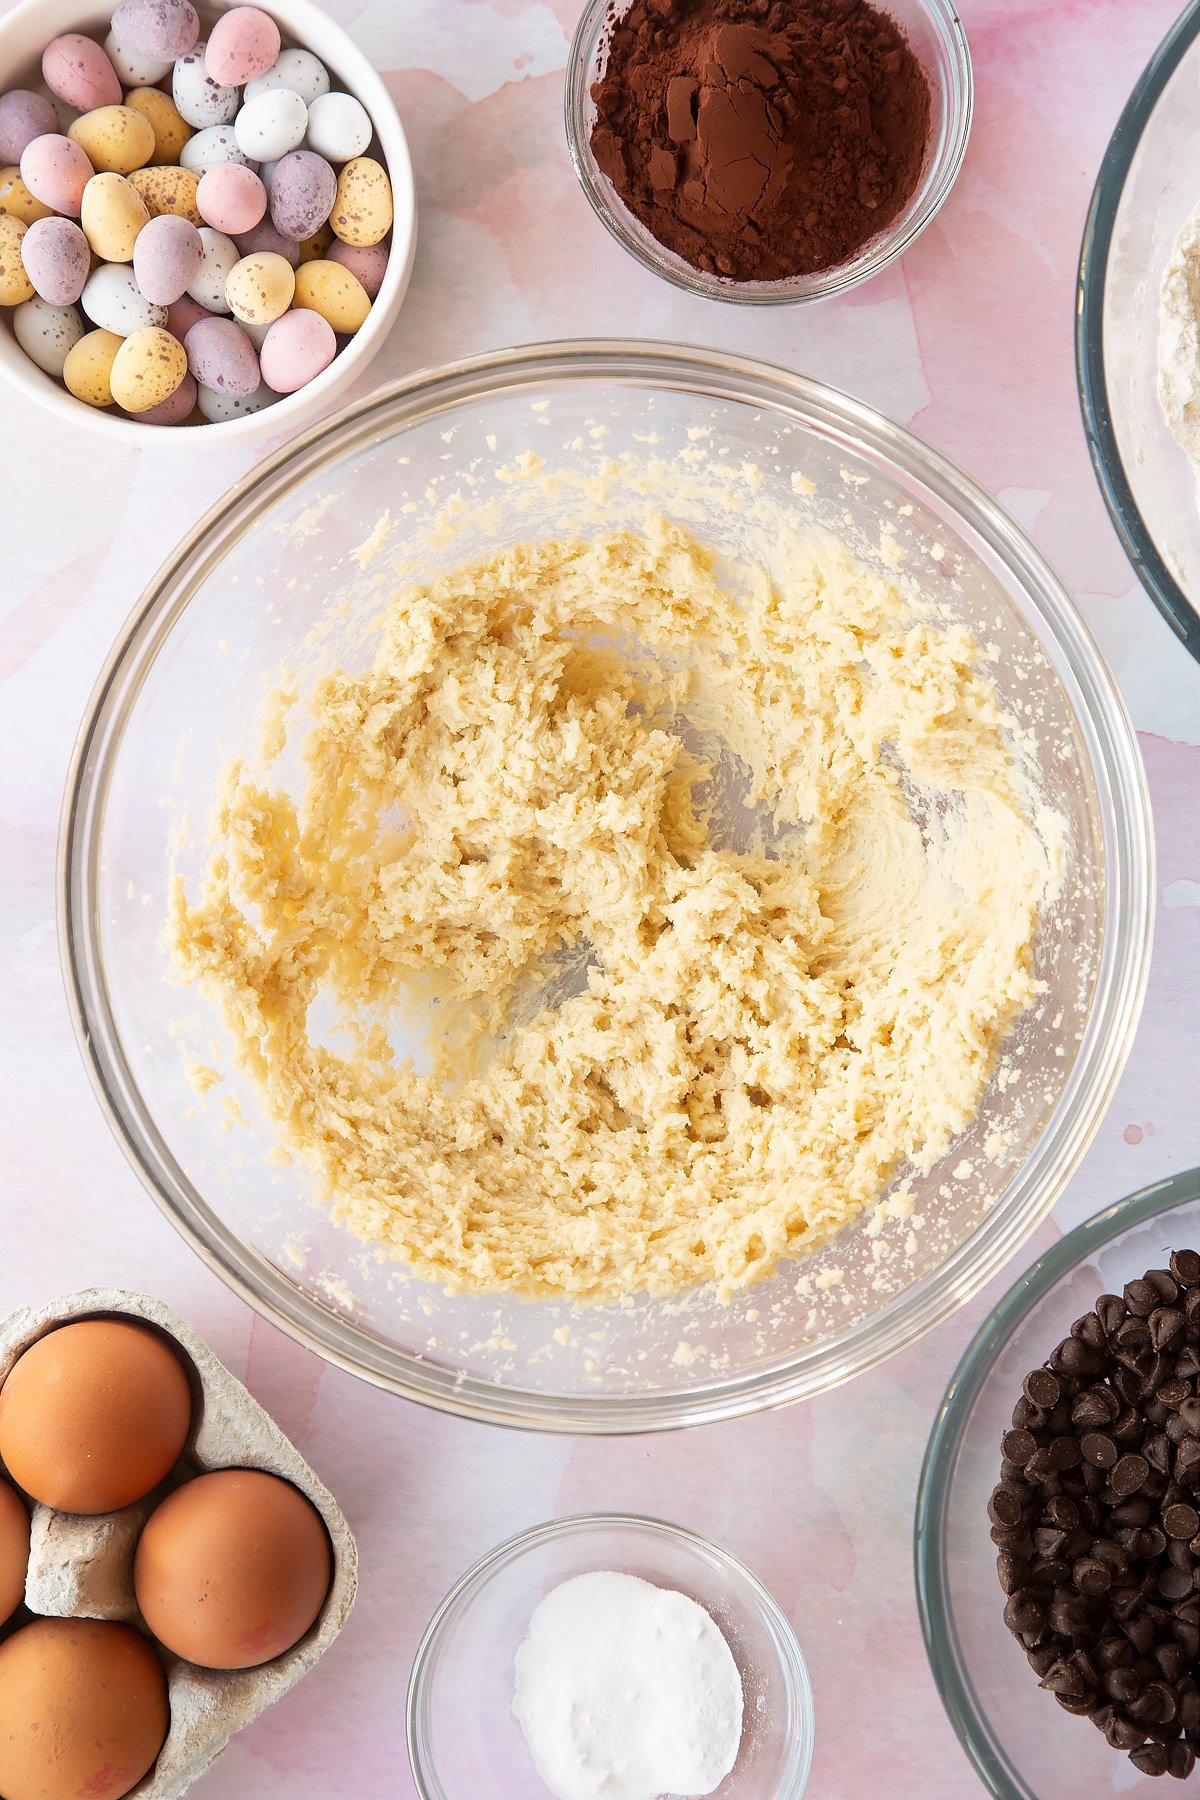 Butter and golden granulated sugar beaten together in a bowl. Ingredients to make Chocolate Easter cookies surround the bowl.